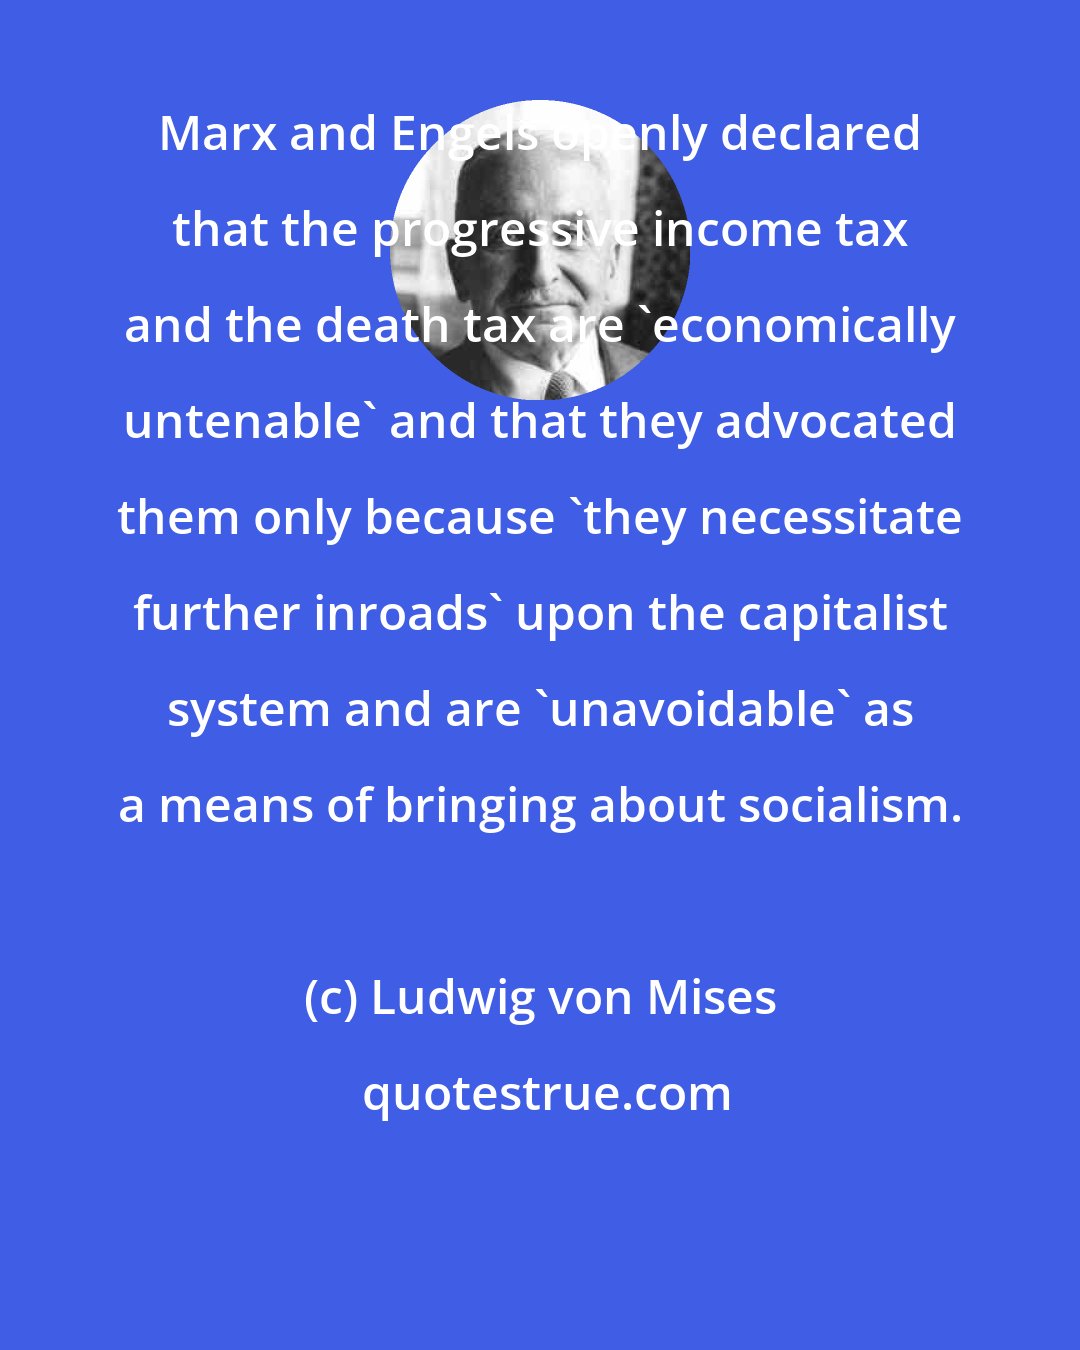 Ludwig von Mises: Marx and Engels openly declared that the progressive income tax and the death tax are 'economically untenable' and that they advocated them only because 'they necessitate further inroads' upon the capitalist system and are 'unavoidable' as a means of bringing about socialism.